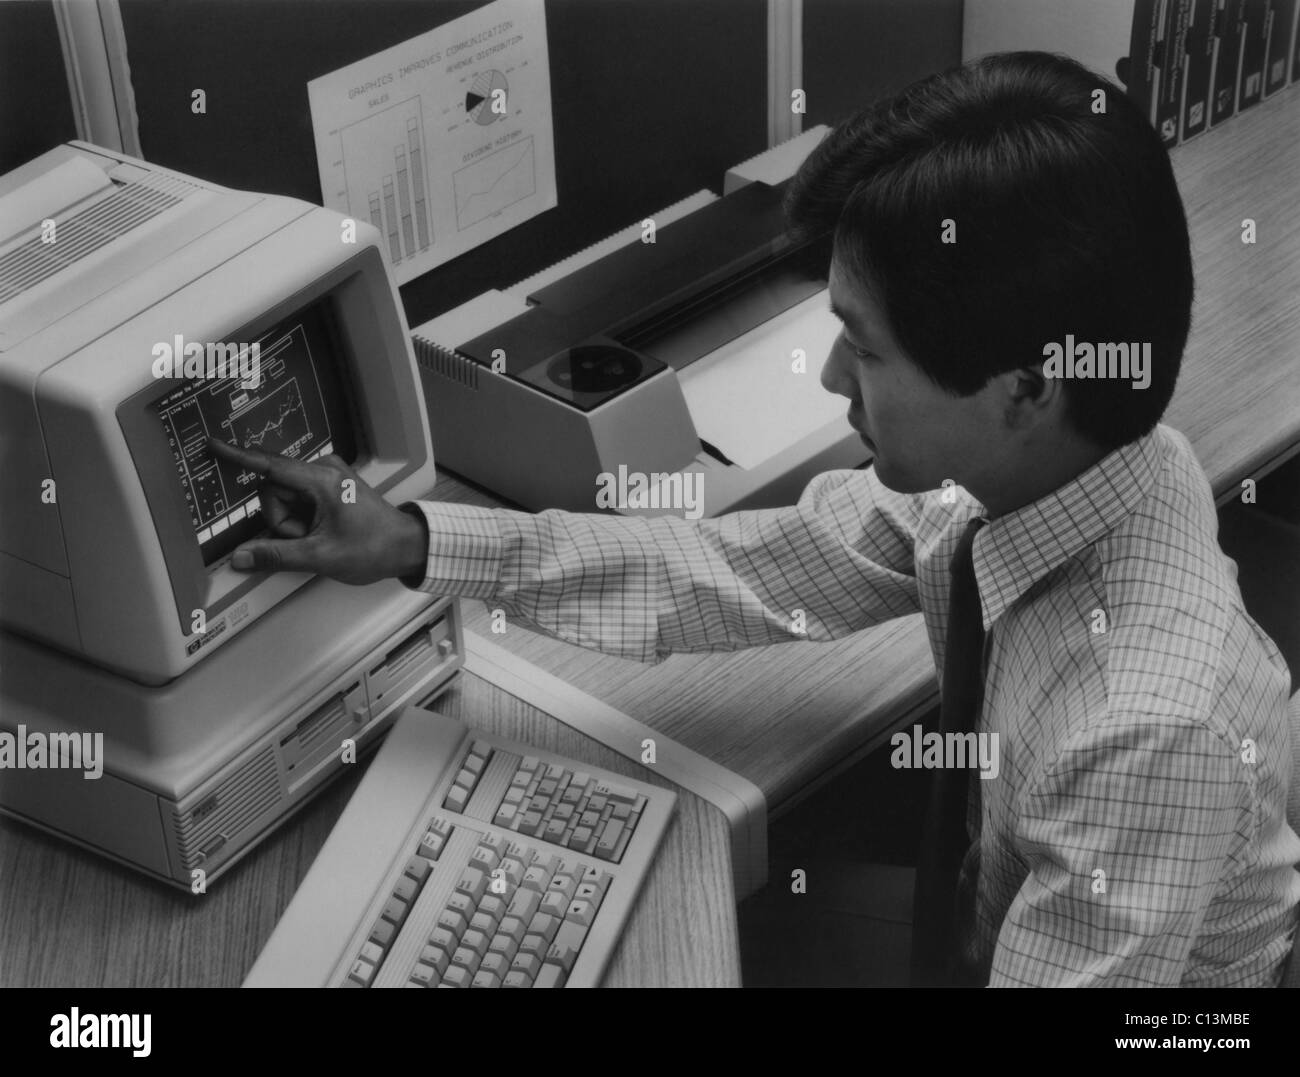 The 1983 Hewlett Packard-150 personal computer featured a touch-sensitive screen. It used a MS-DOS operating system an Intel 8088 microprocessor and duel 3-1/2 inch floppy-disk drives. Stock Photo